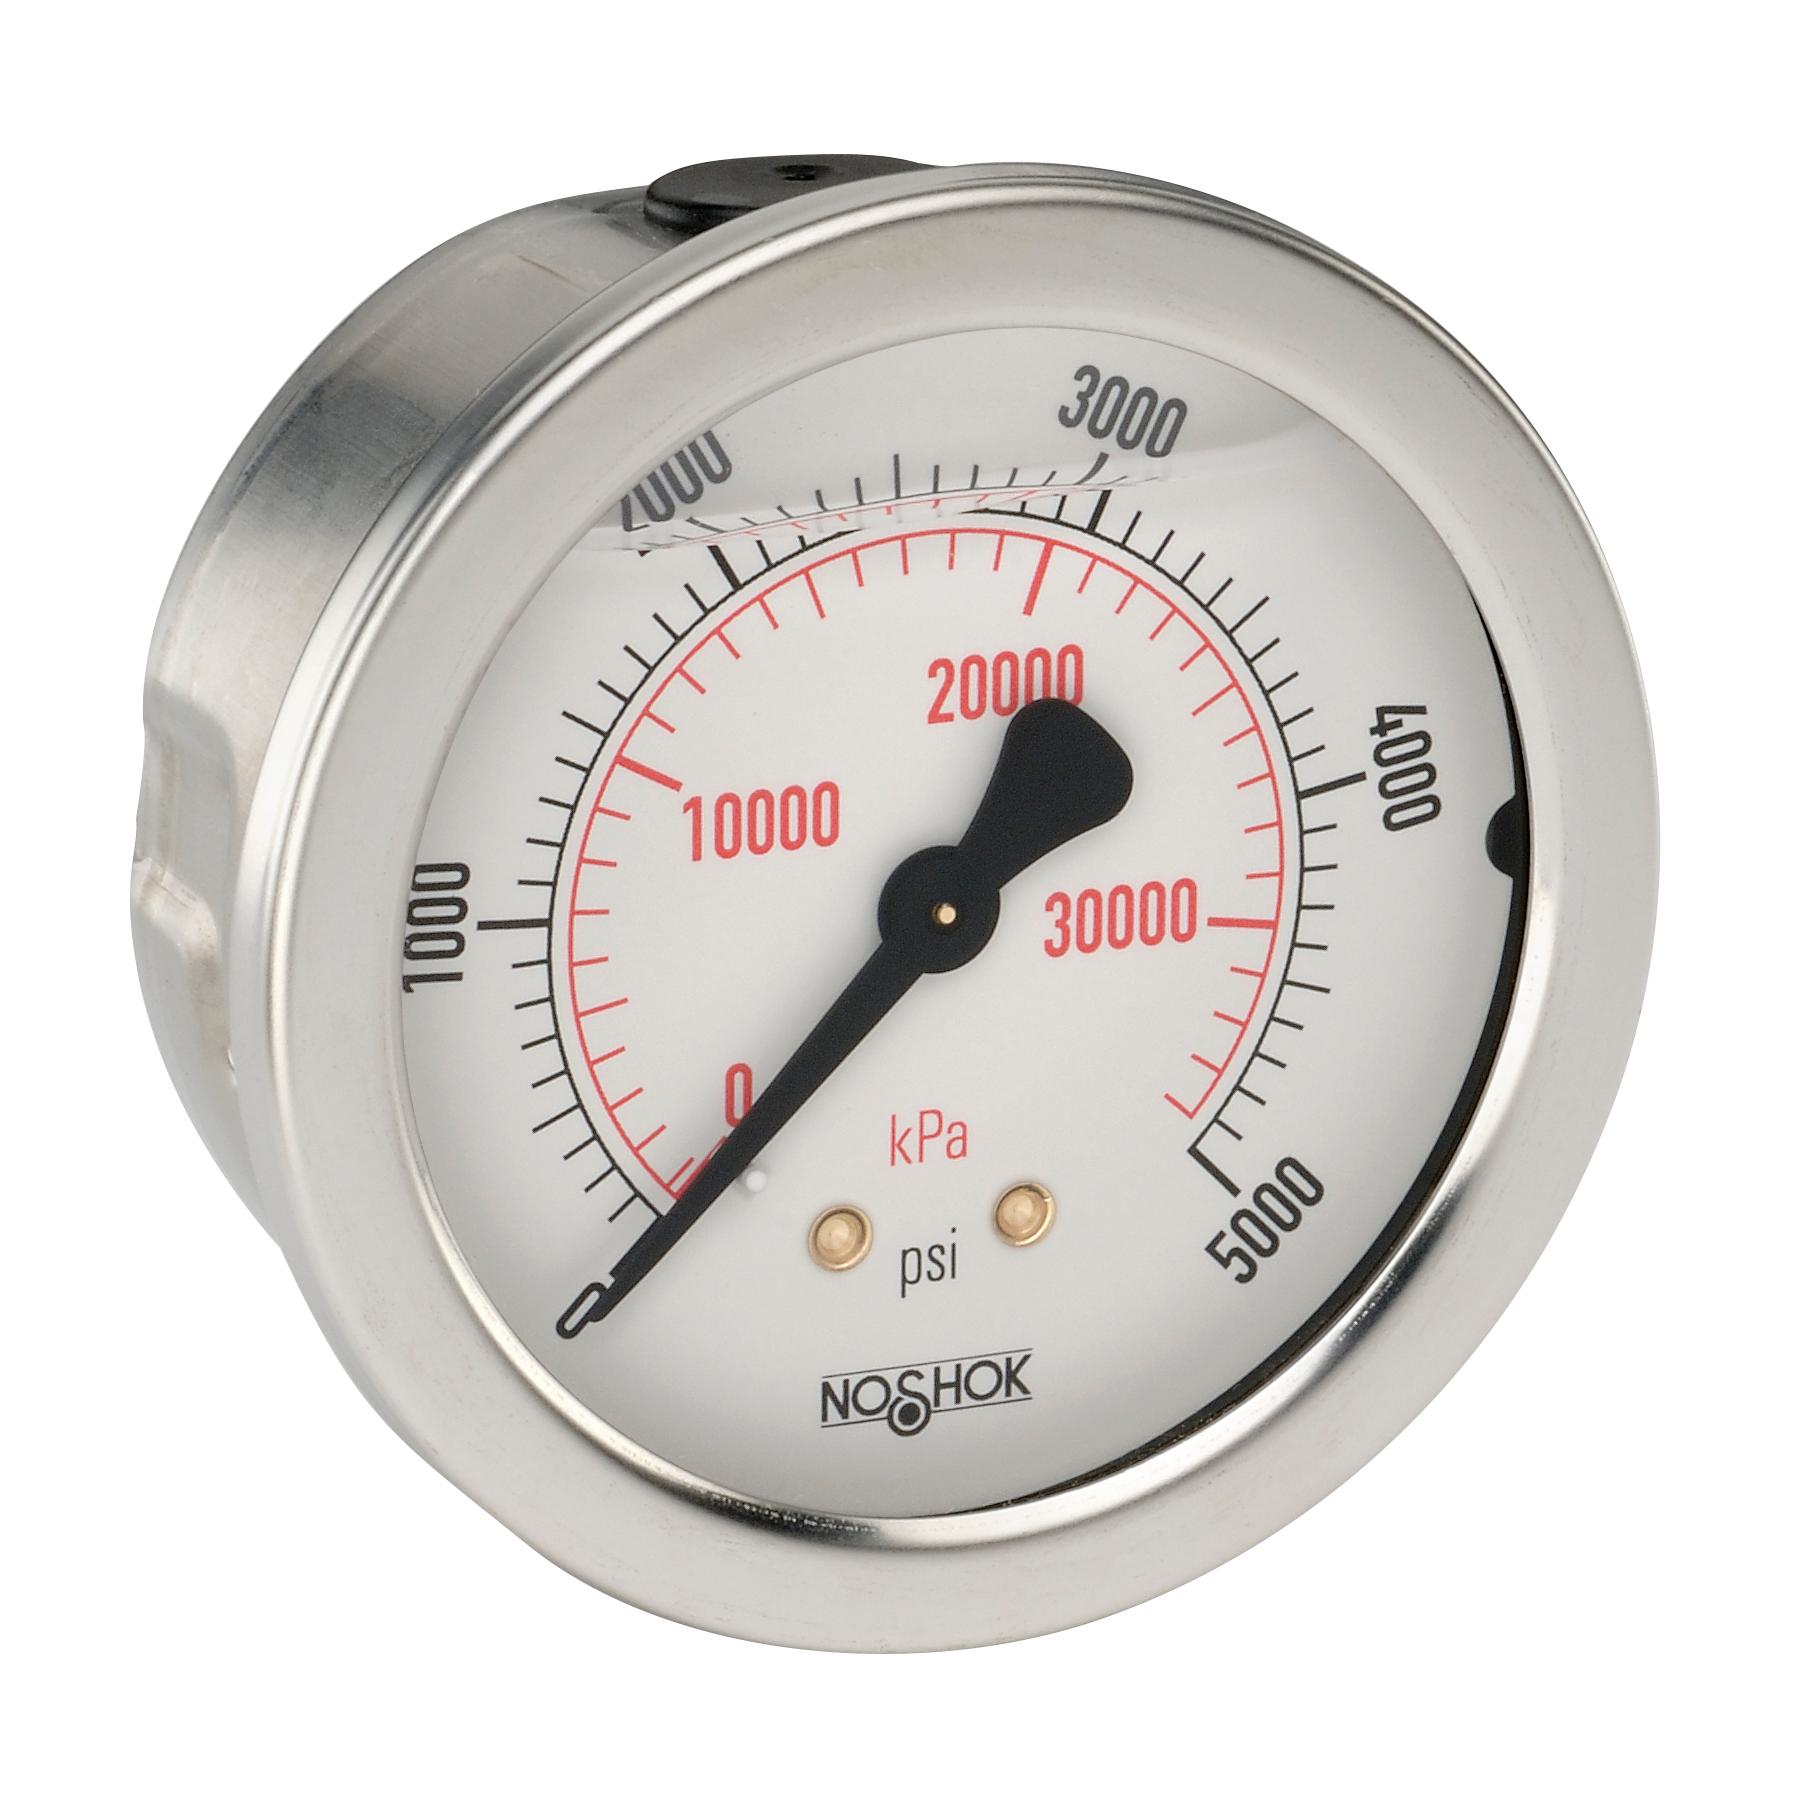 Noshok 25-911-300-PSI/BAR 2-1/2'' 304 Stainless Steel Case, Copper Alloy Internals, 300 psi/bar, 1/4'' National Pipe Thread (NPT) Male Back Connection Pressure Gauge with Glycerin Filled